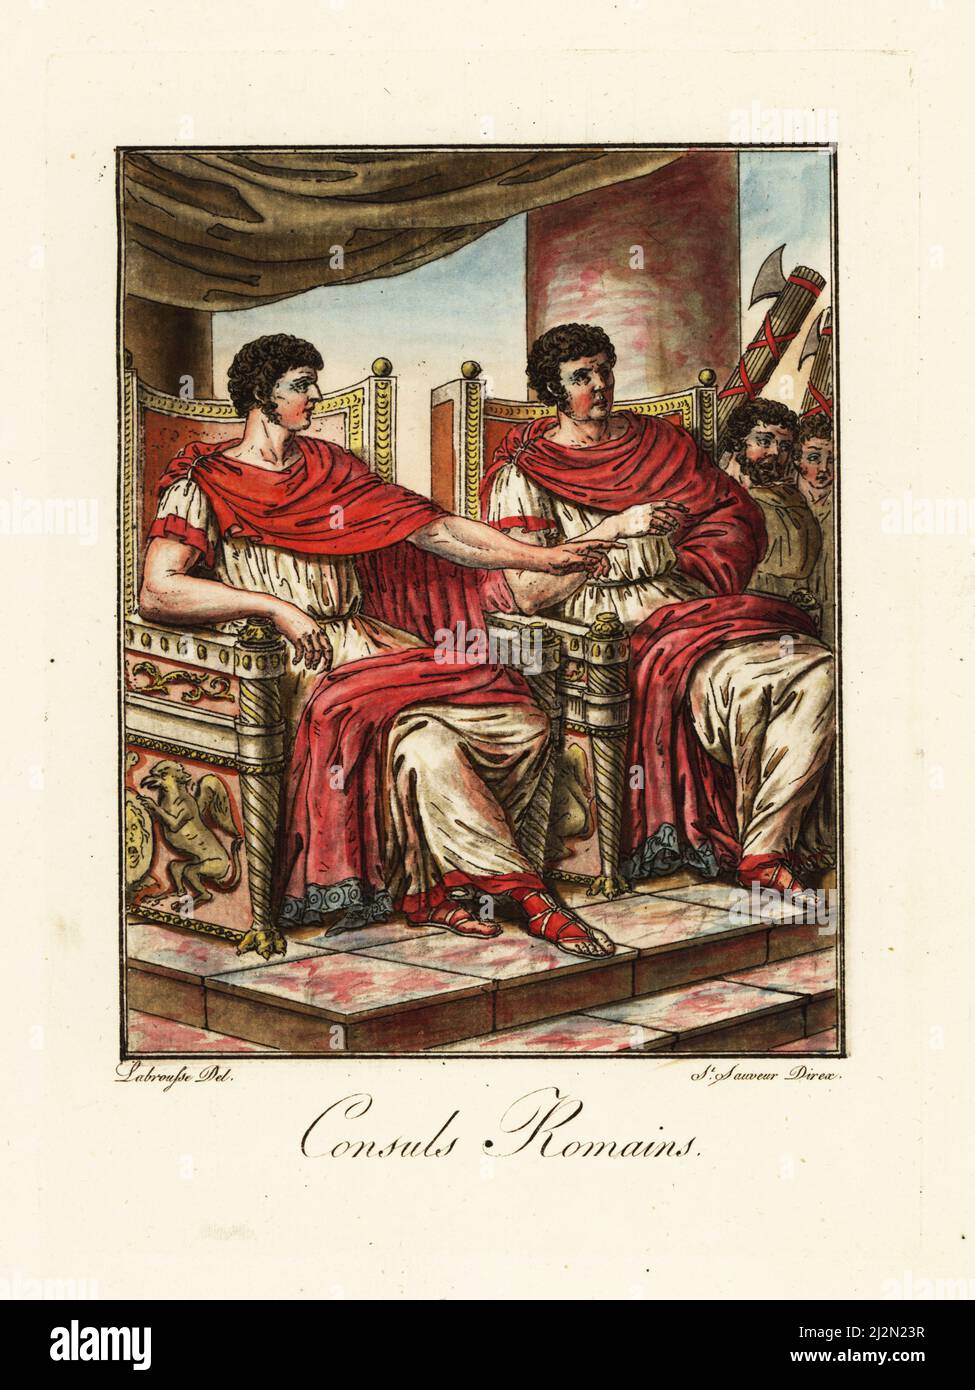 Two Roman consuls seated on thrones in ancient Rome. They wear purple-bordered toga praetexta and are attended by lictors with fasces. Consuls Romains. Handcoloured copperplate drawn and engraved by L. Labrousse, artist of Bordeaux, under the direction of Jacques Grasset de Saint-Sauveur from his L’antique Rome, ou description historique et pittoresque, Ancient Rome, or historical and picturesque description, Chez Deroy, Paris, 1796. Stock Photo